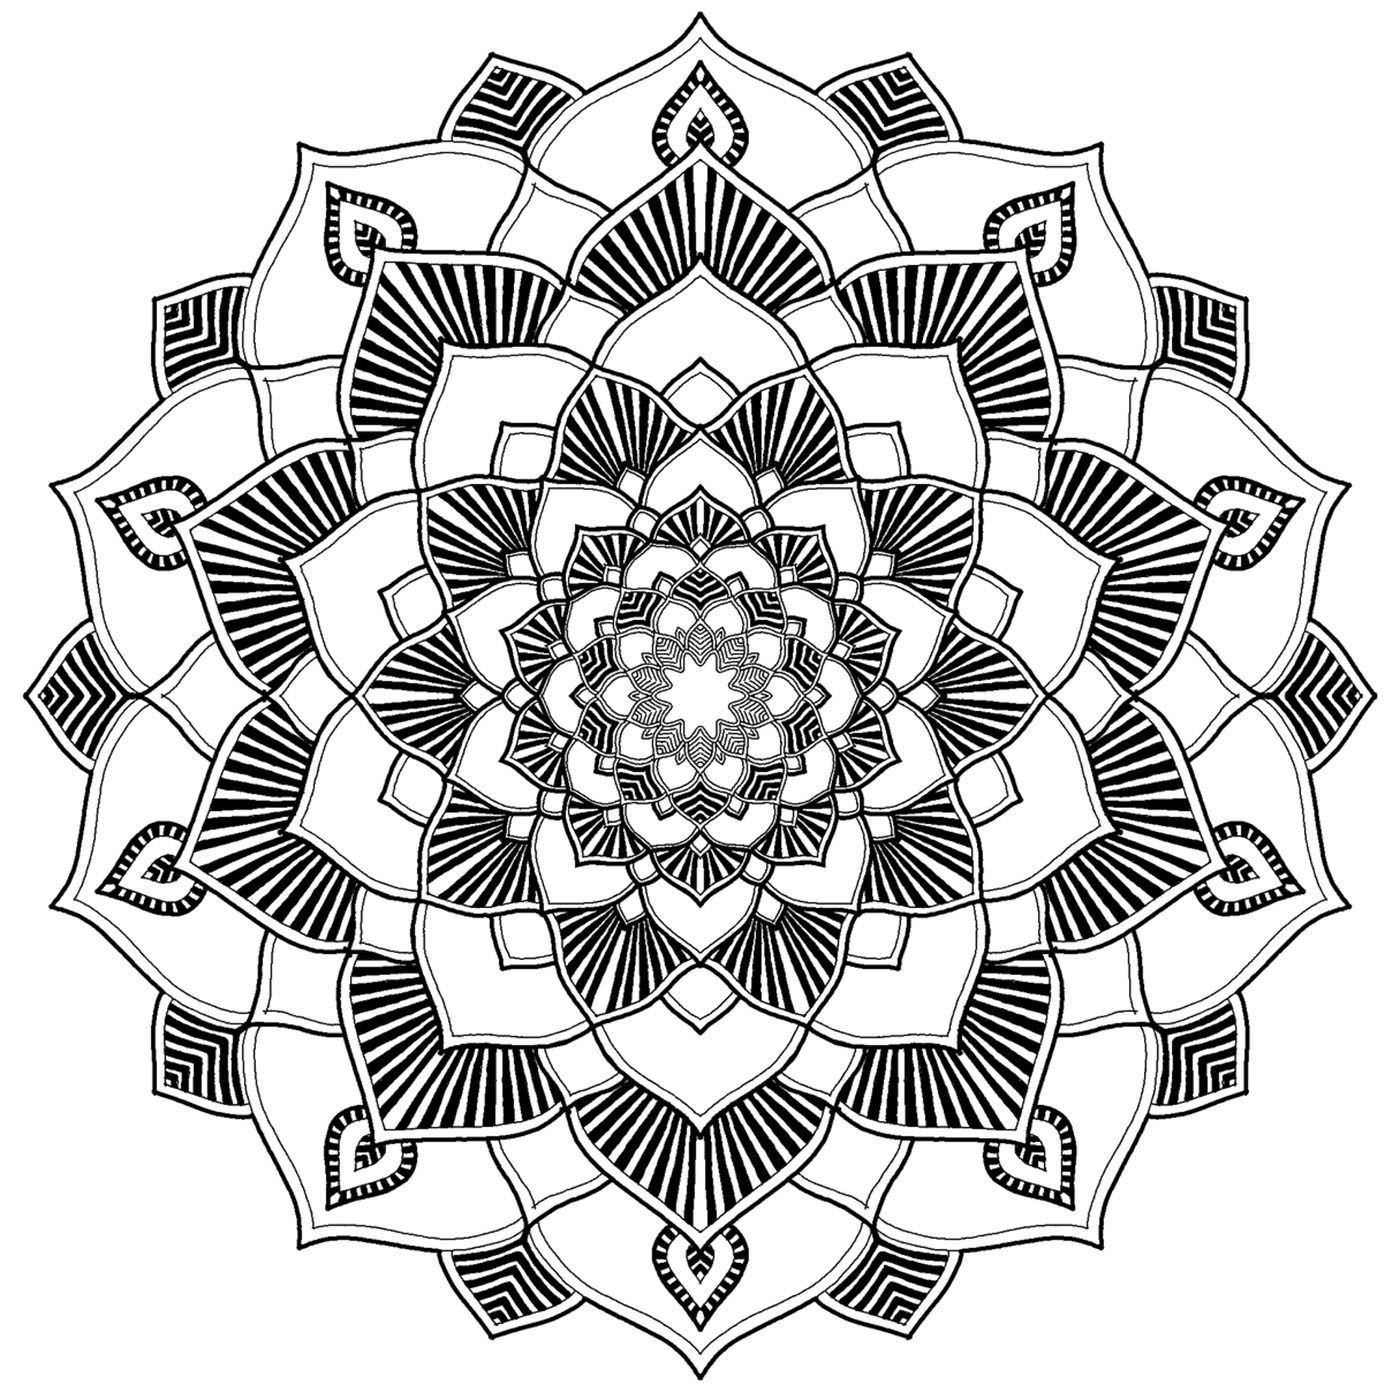 A Mandala coloring page with a lot of details, very unique, perfect if you like cool and relaxing coloring pages.